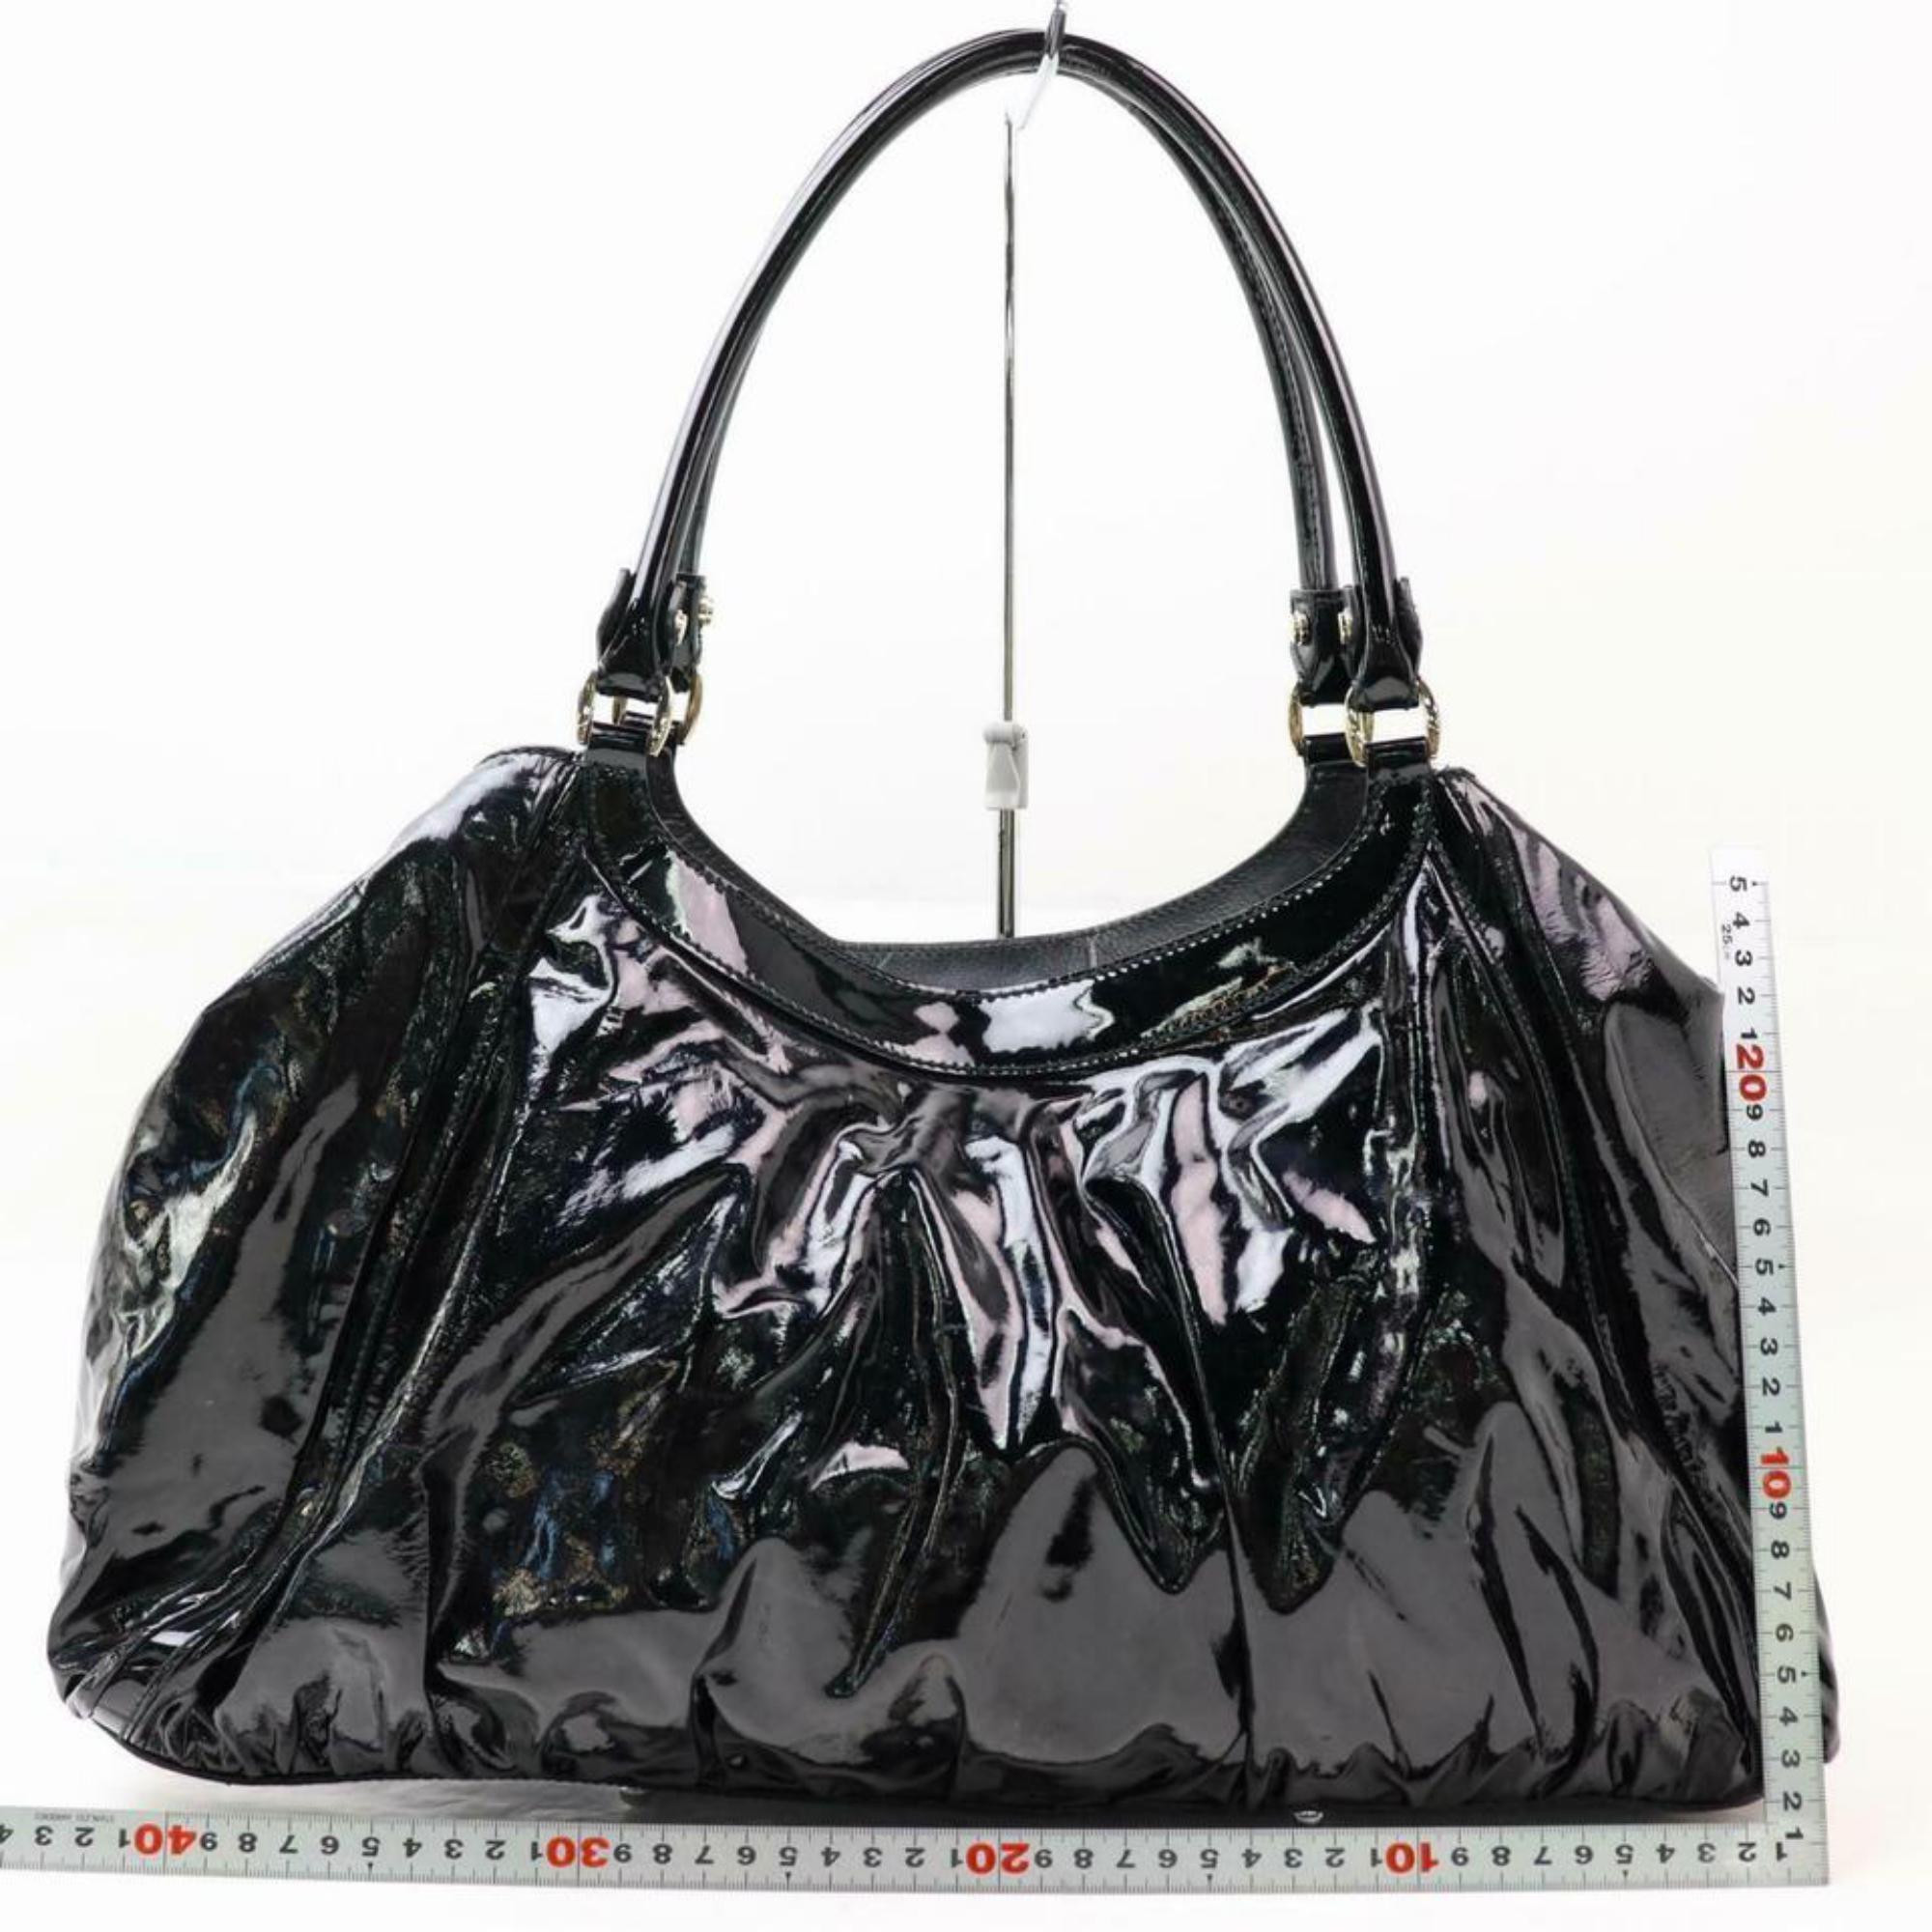 Gucci Abbey D-ring Hobo 870263 Black Patent Leather Satchel For Sale 2